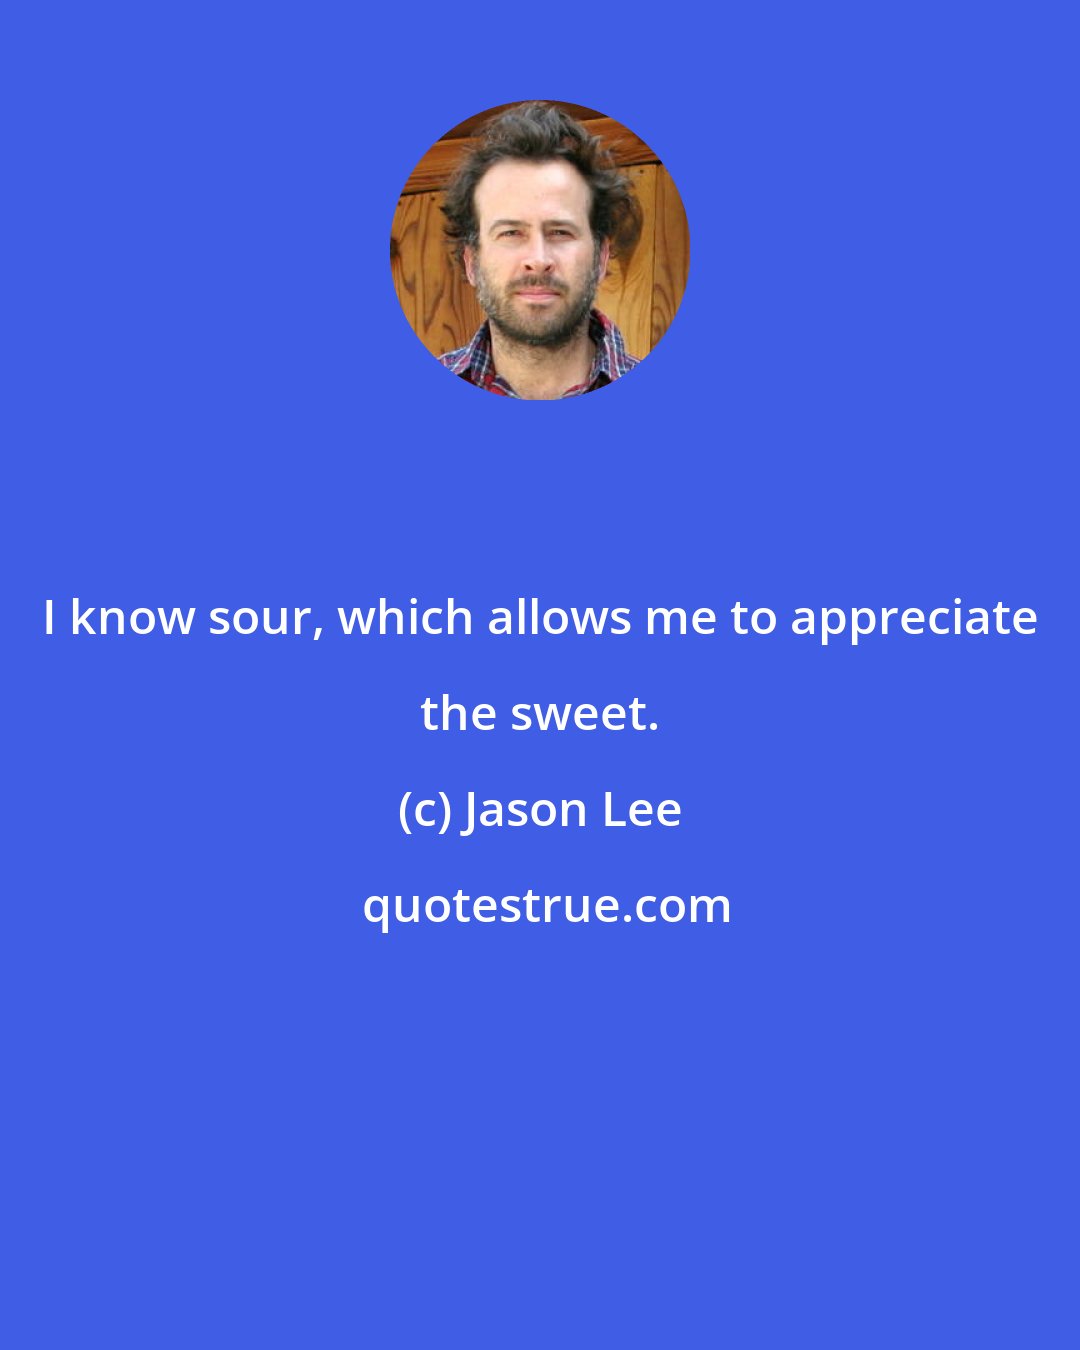 Jason Lee: I know sour, which allows me to appreciate the sweet.